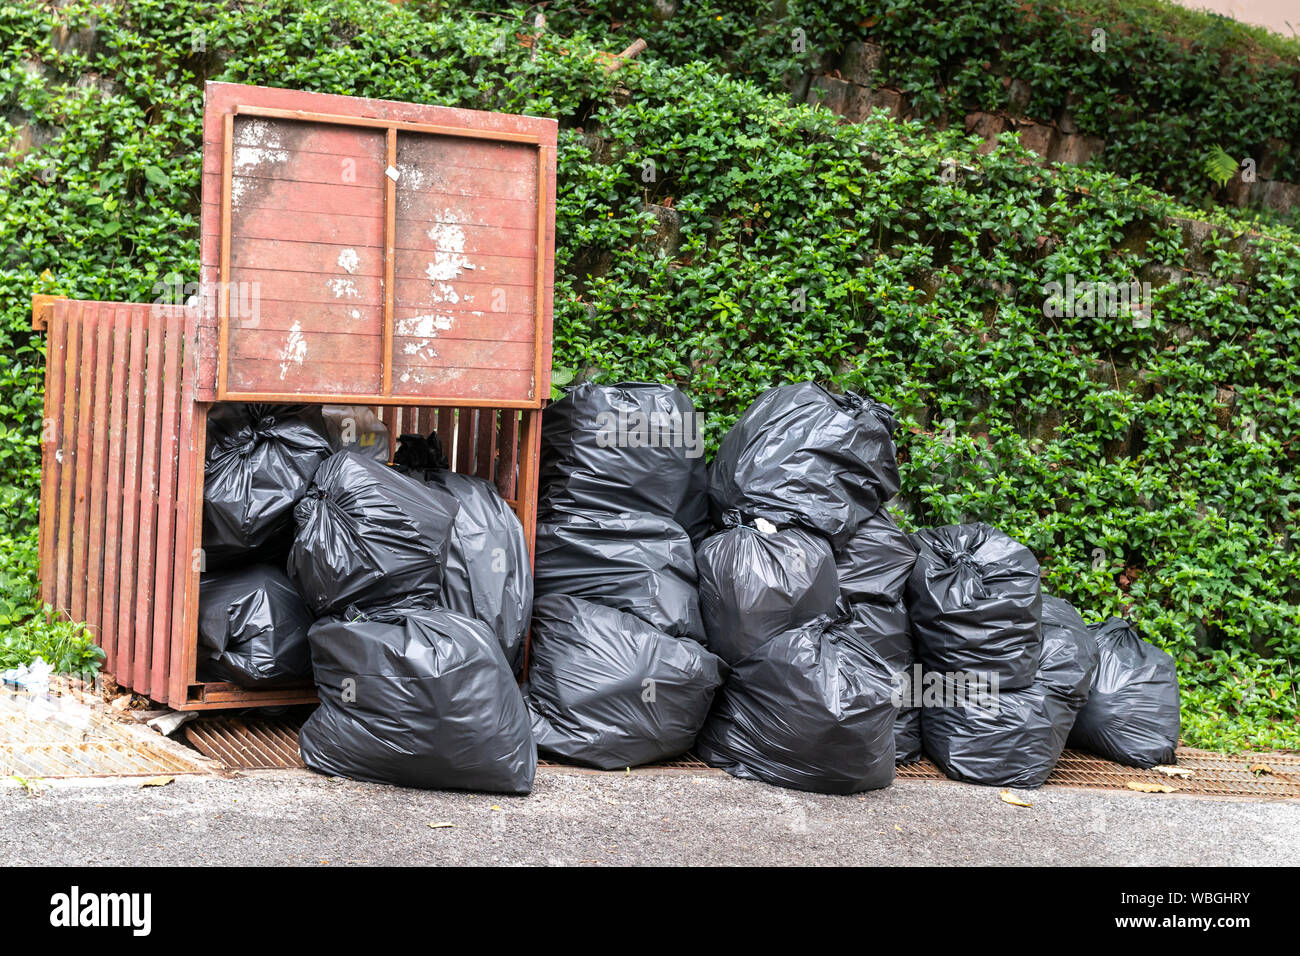 https://c8.alamy.com/comp/WBGHRY/pile-of-black-garbage-at-side-road-in-big-city-pile-of-garbage-plastic-black-and-trash-bag-waste-many-WBGHRY.jpg